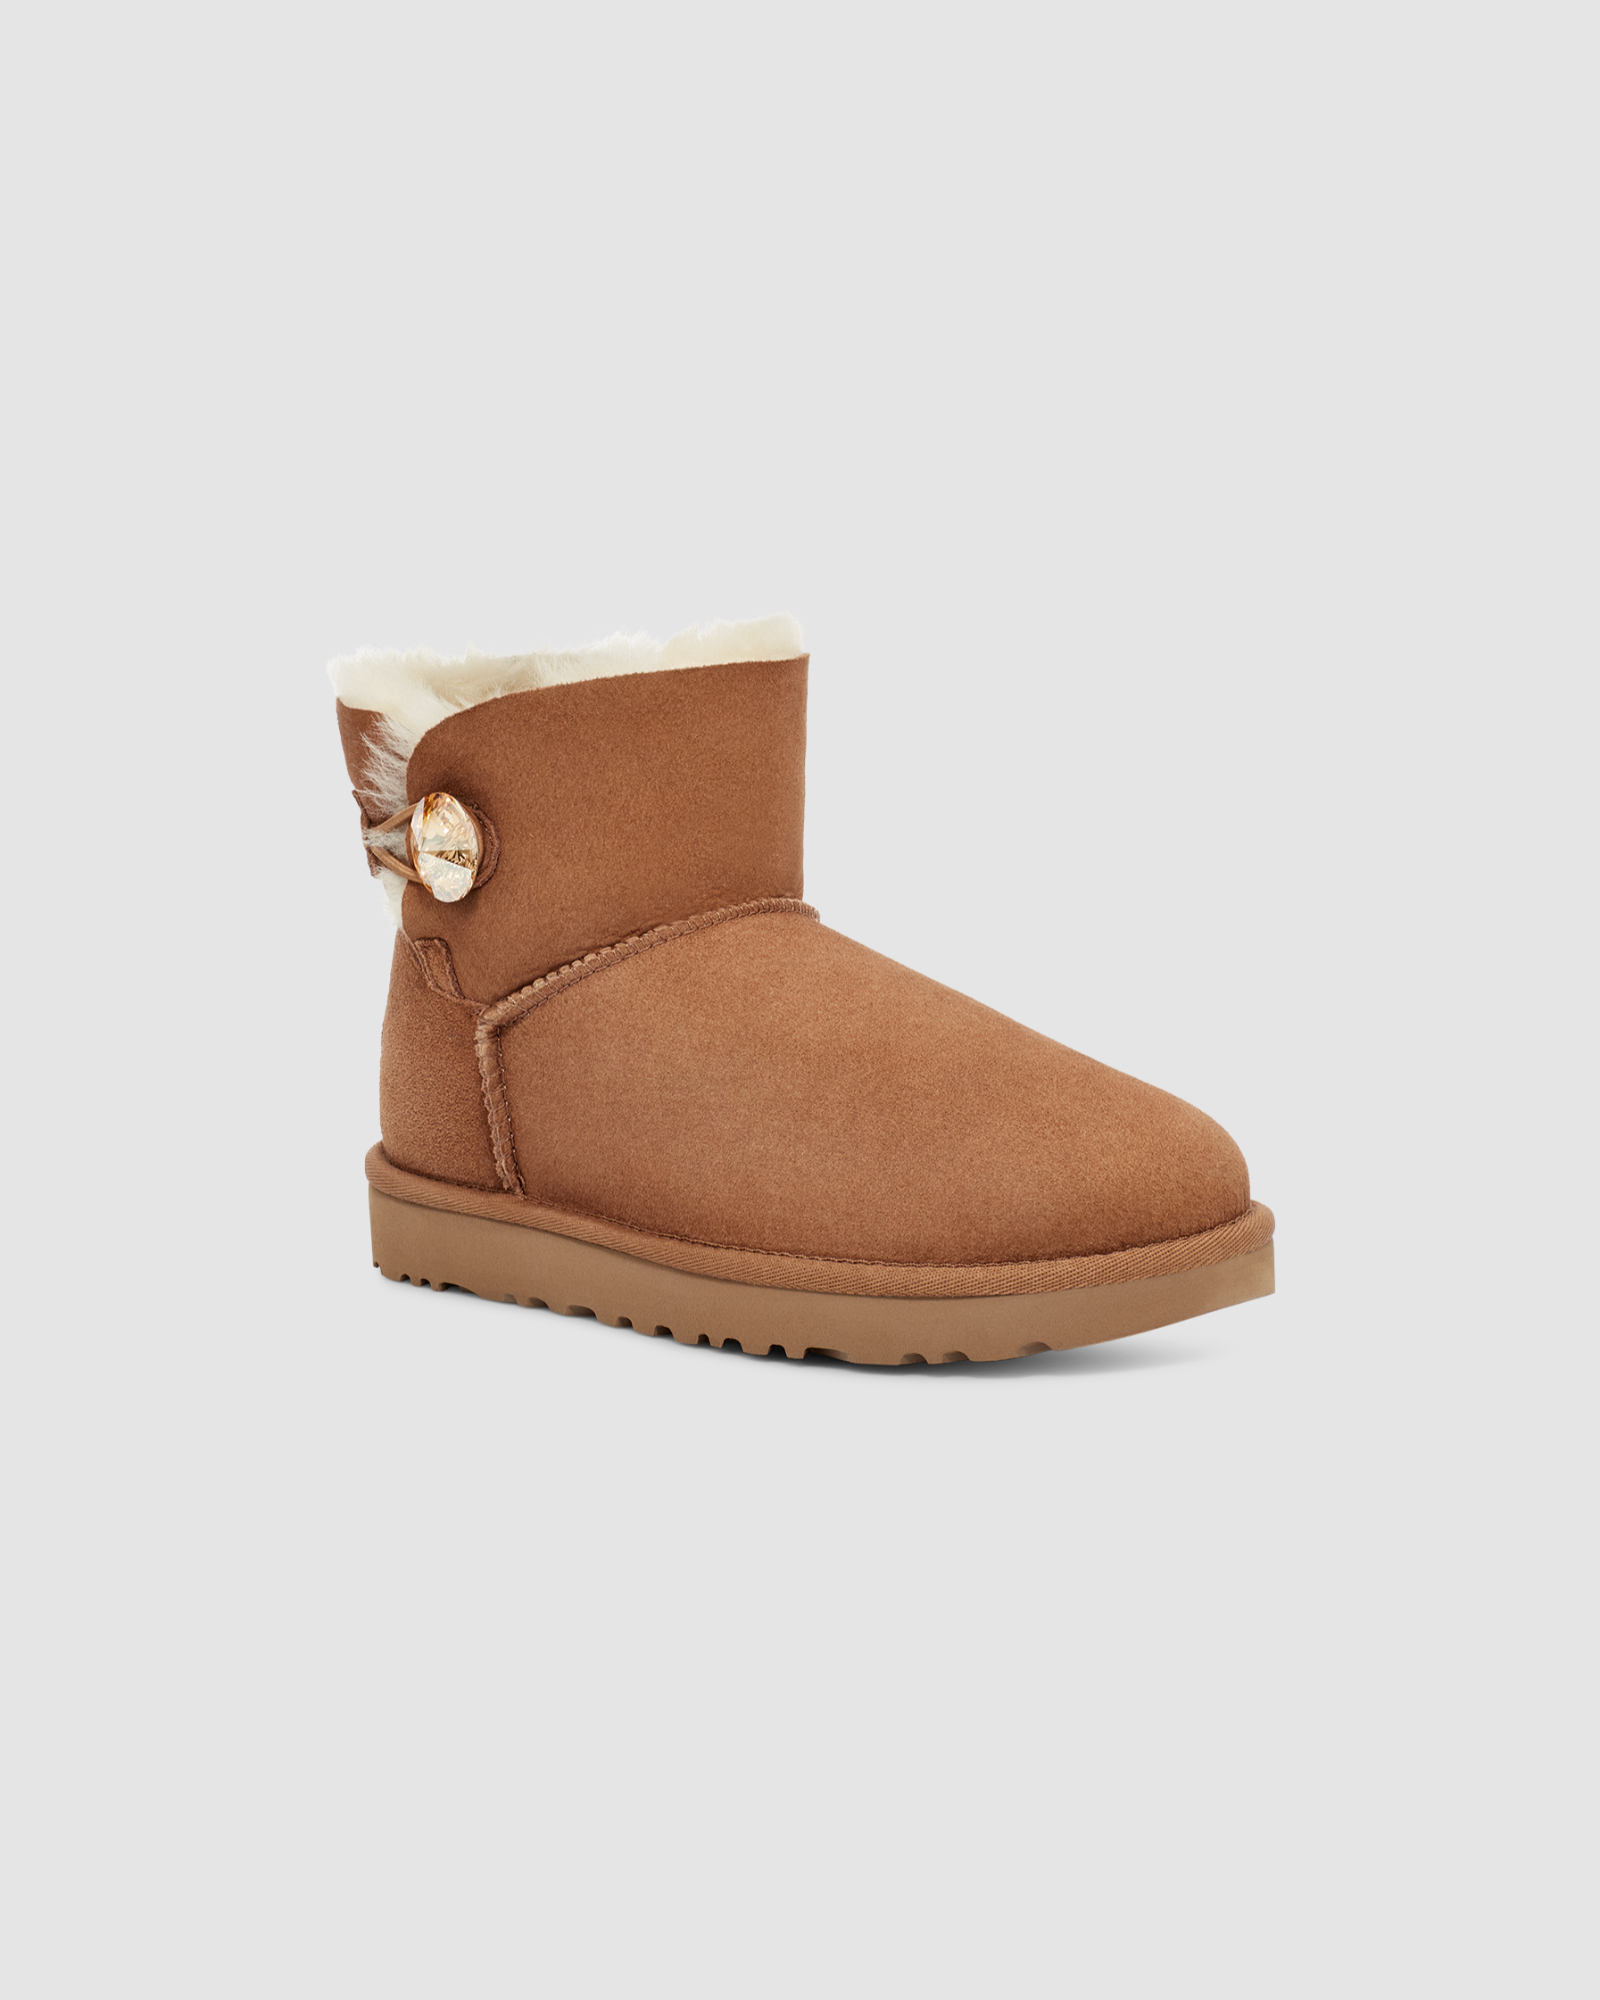 Mini Bailey Button Bling Boot Chestnut/Gold | UGG